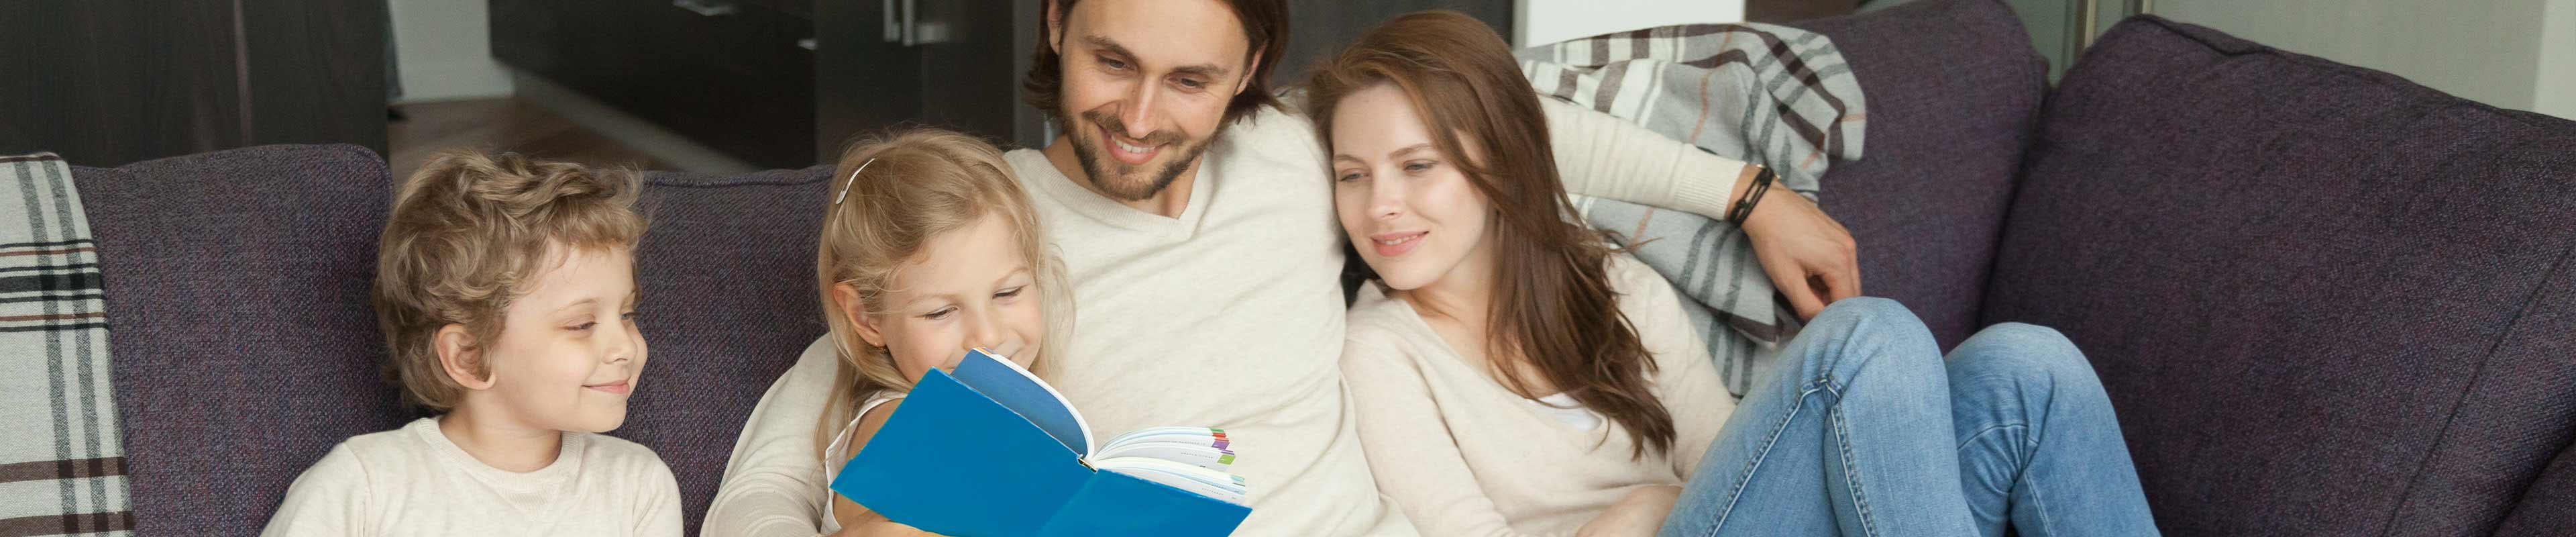 Image of a family on a living room couch reading a book together.